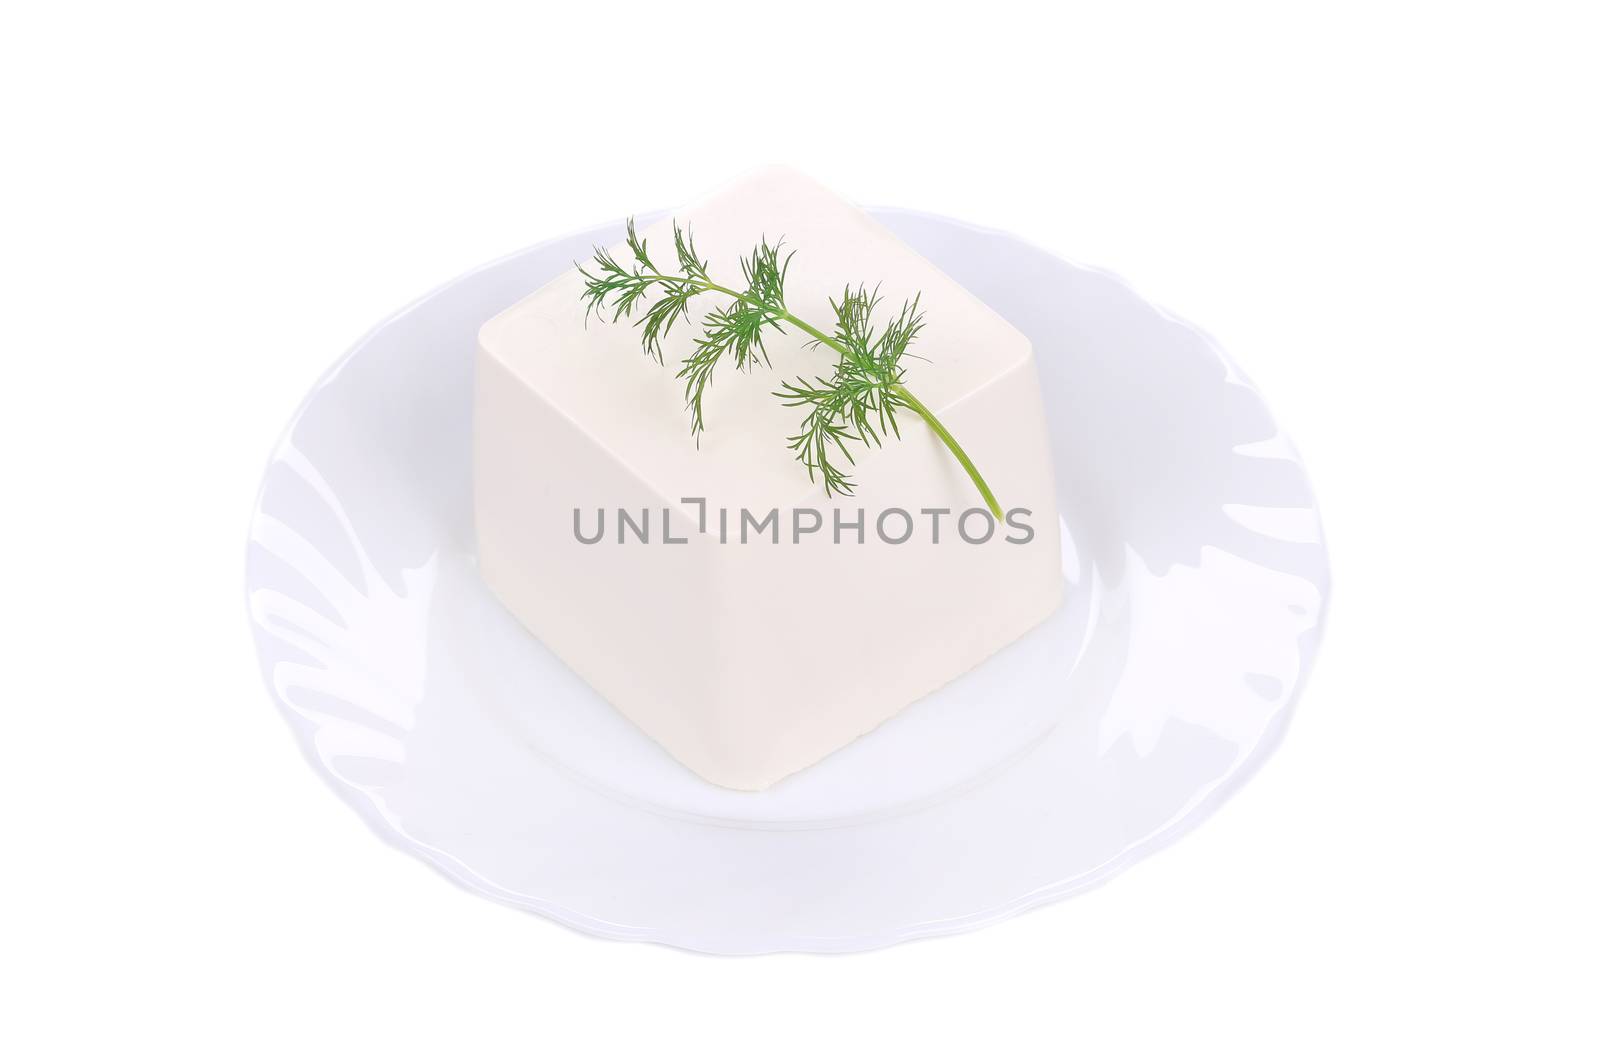 Feta cheese with dill herb. Isolated on a white background.